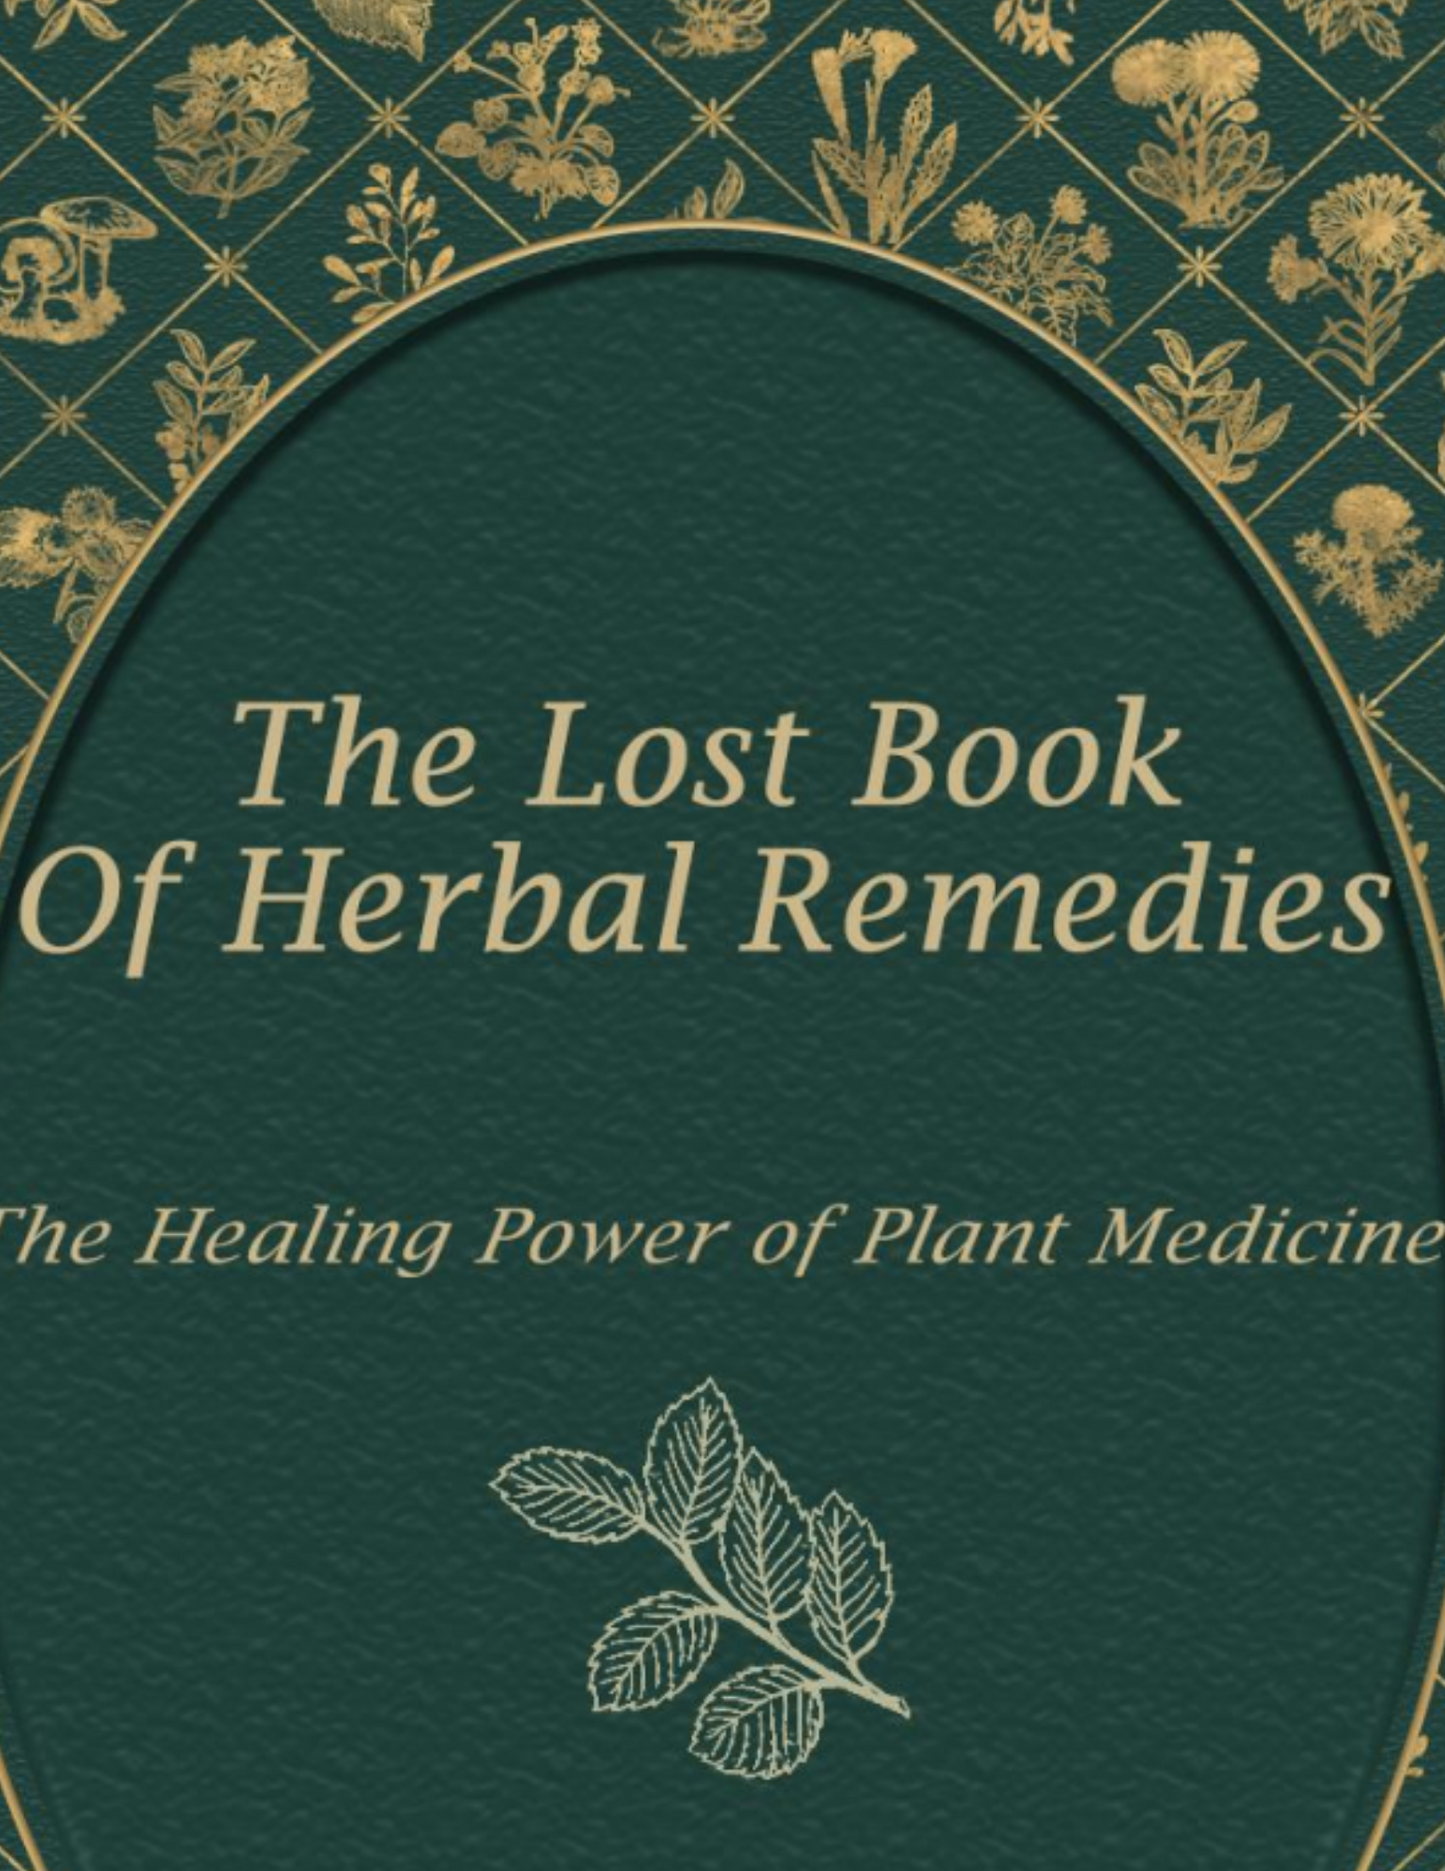 [Limited time on the site] The Lost Book of Herbal Remedies | Ebook Instant Download | Holistic healing Guide | 800+ remedies | Colorful Photos